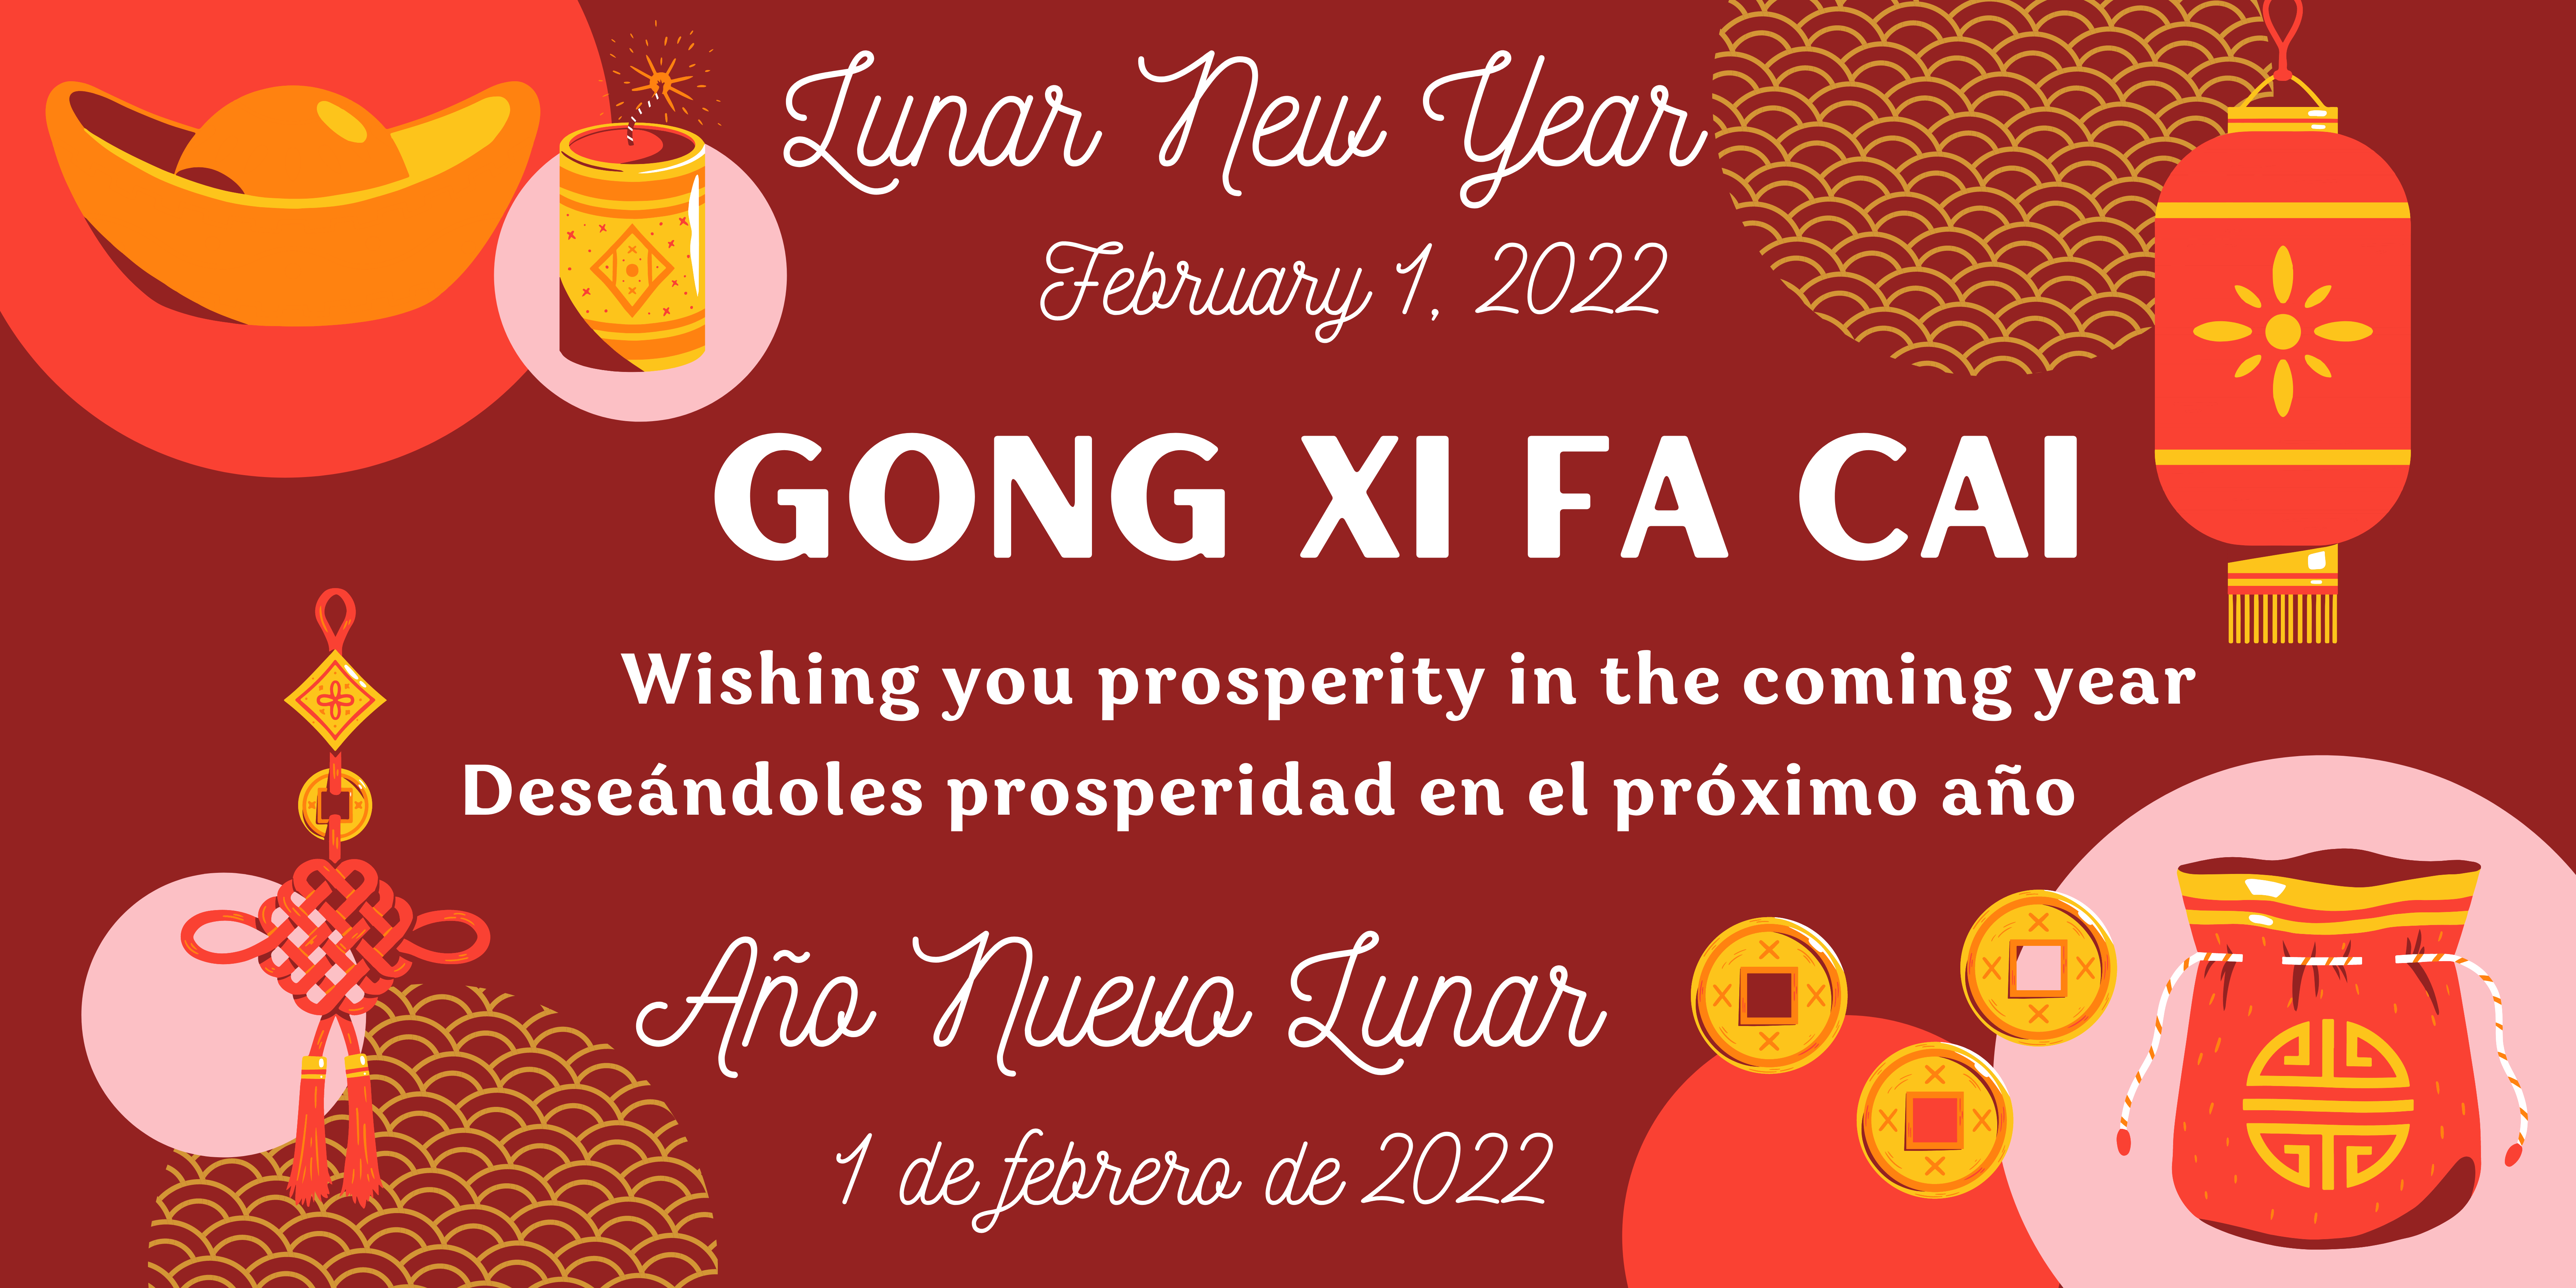 White text on red background: Lunar New Year, February 1, 2022. Gong Xi Fa Cai. Wishing you prosperity in the year to come.